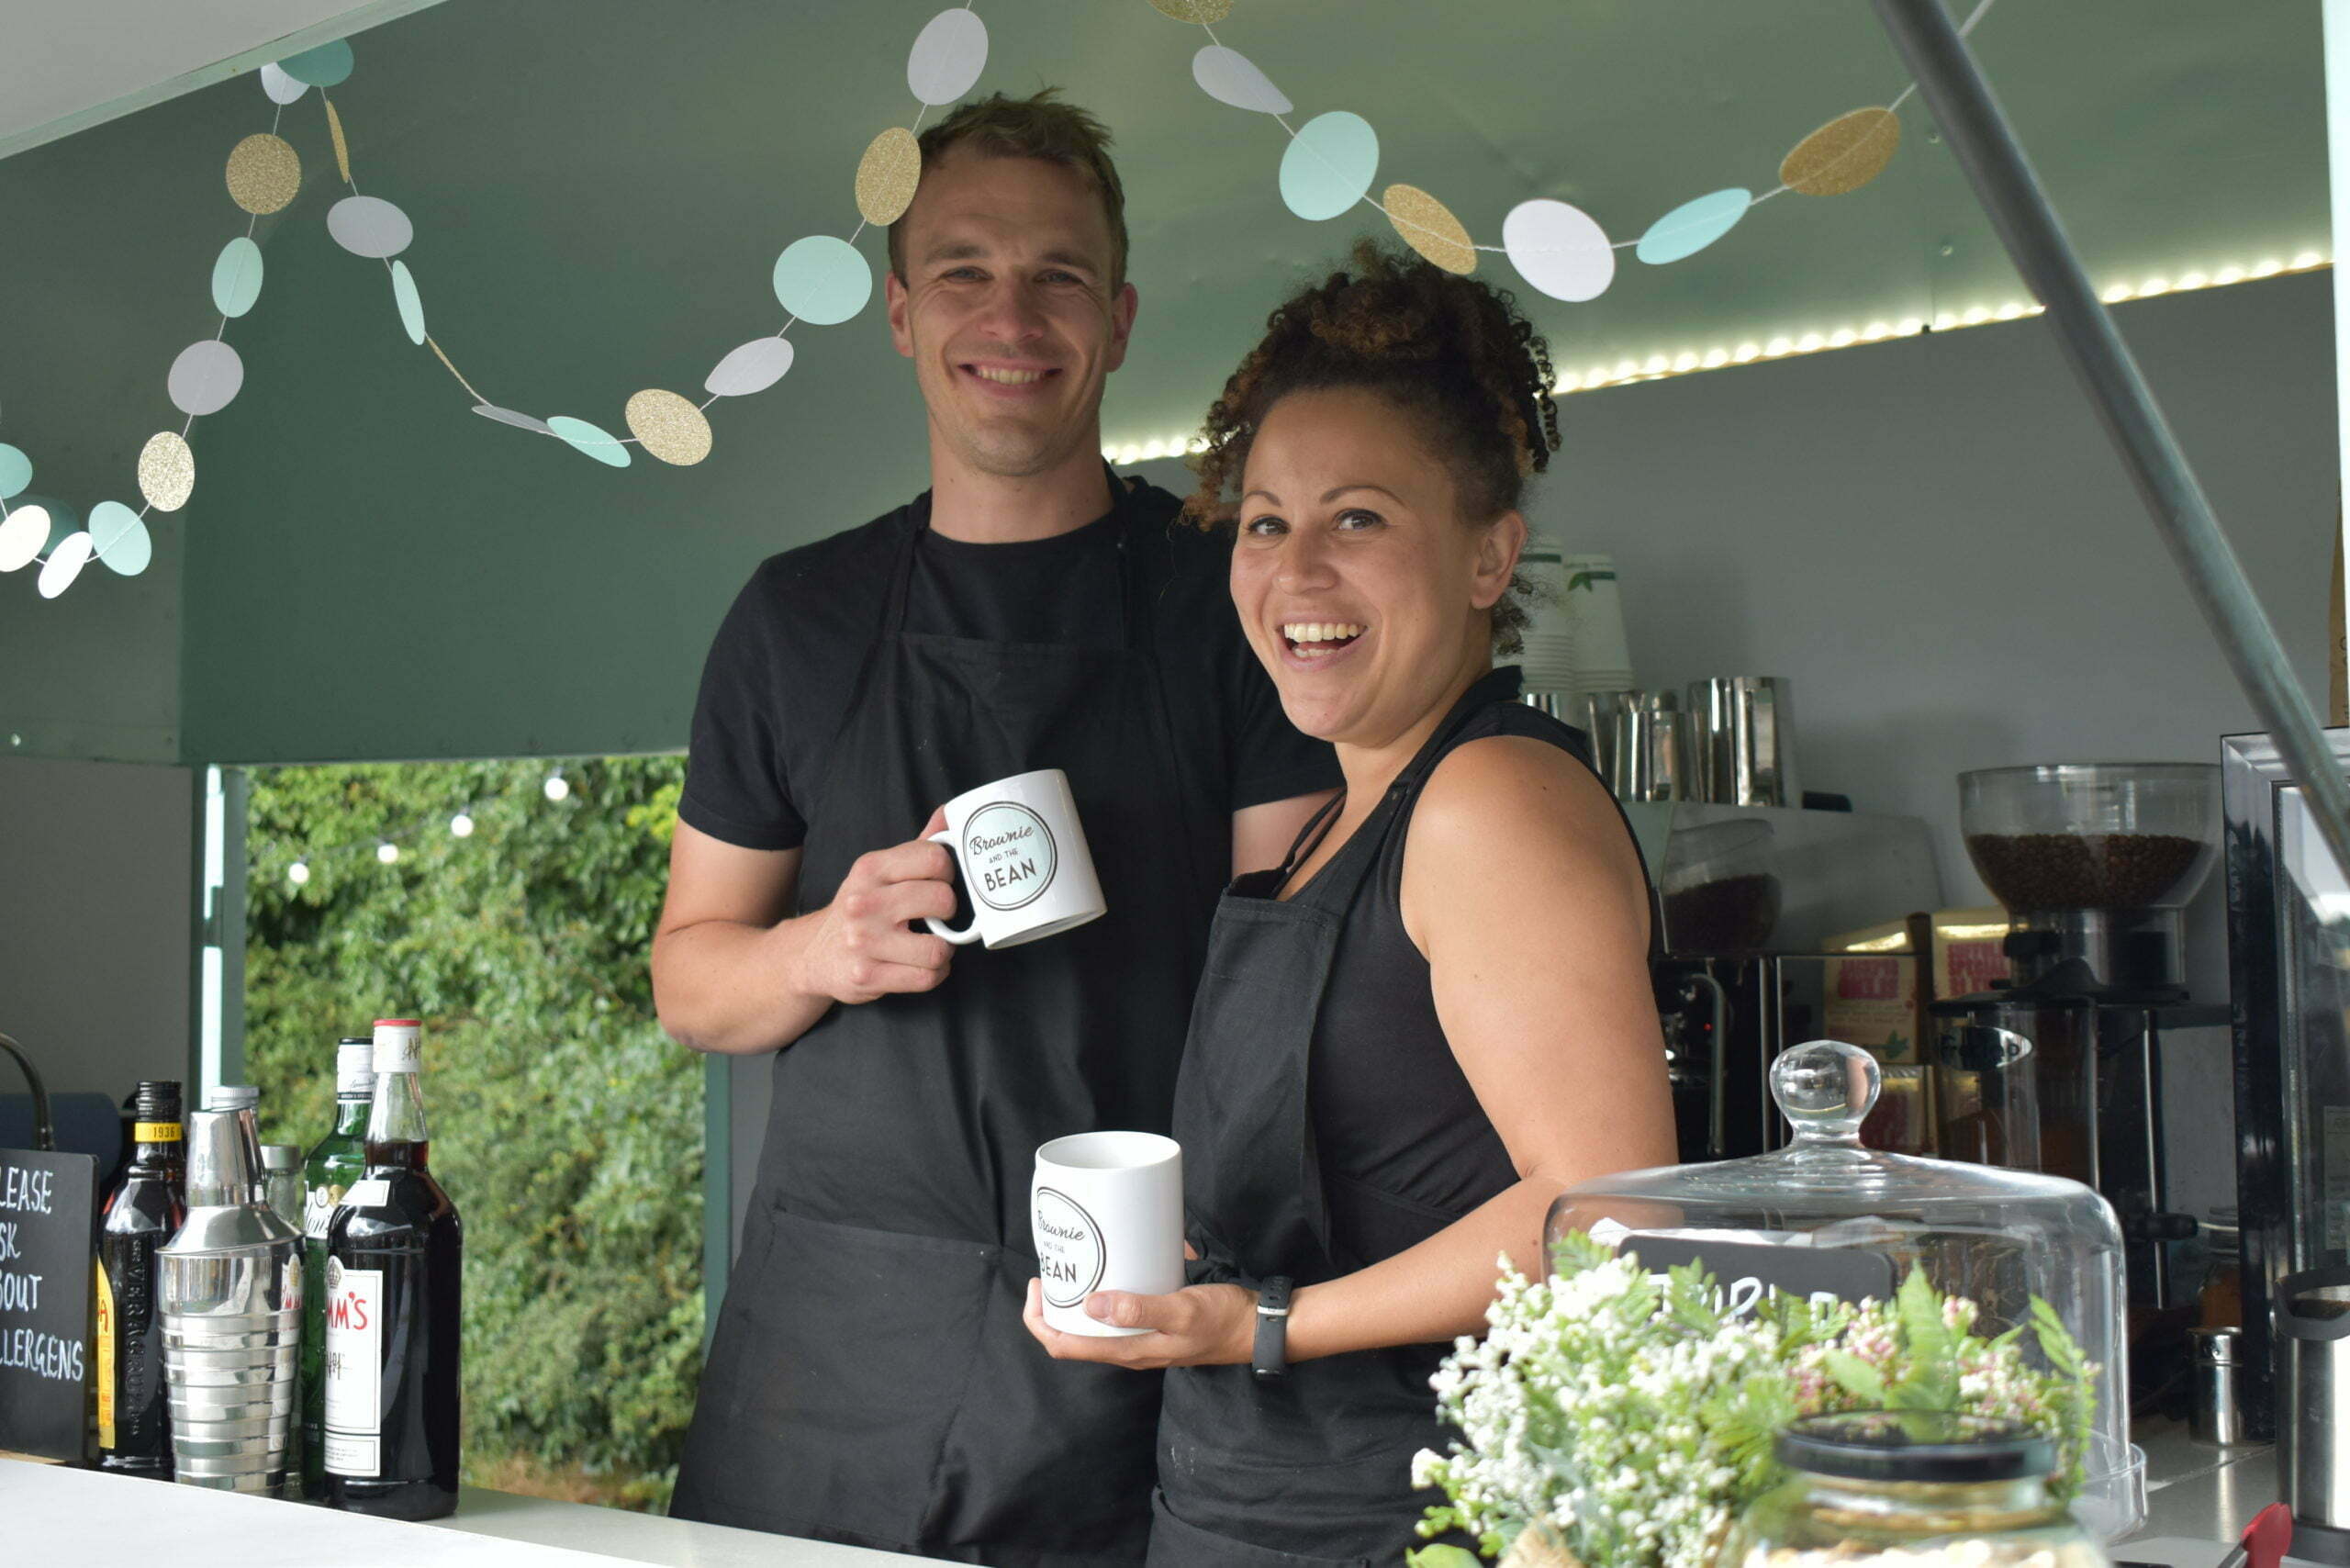 Charlotte and Luke ahead of starting their wholesale cake business, in their converted horse trailer. They're smiling and holding branded mugs. There is bunting in front of their faces and a cake dome to the right with foliage on it.